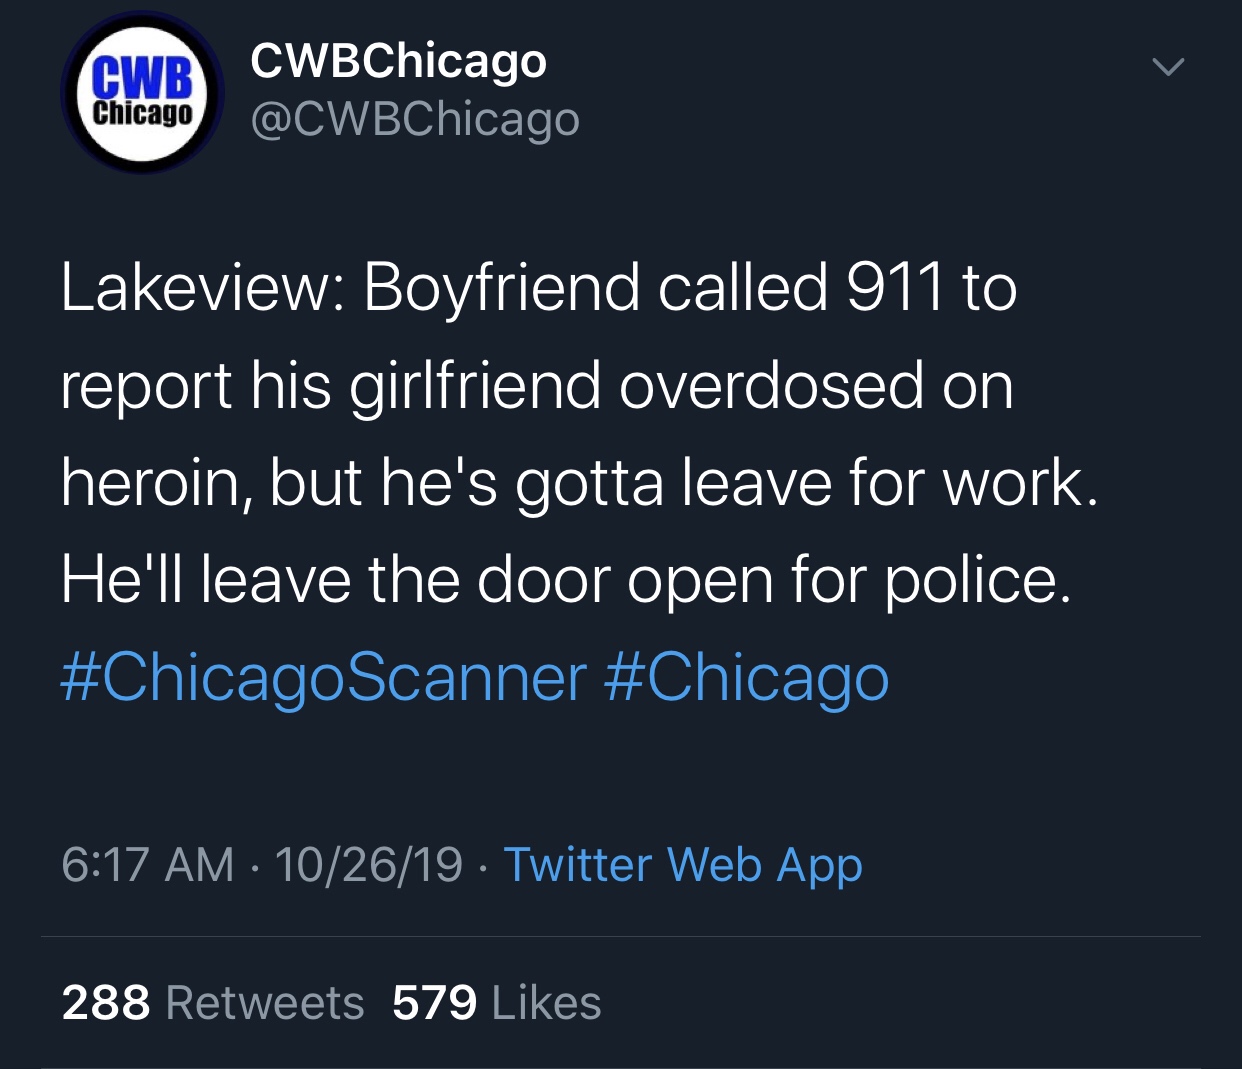 atmosphere - Cwb Chicago CWBChicago Lakeview Boyfriend called 911 to report his girlfriend overdosed on heroin, but he's gotta leave for work. He'll leave the door open for police. 102619 Twitter Web App 288 579